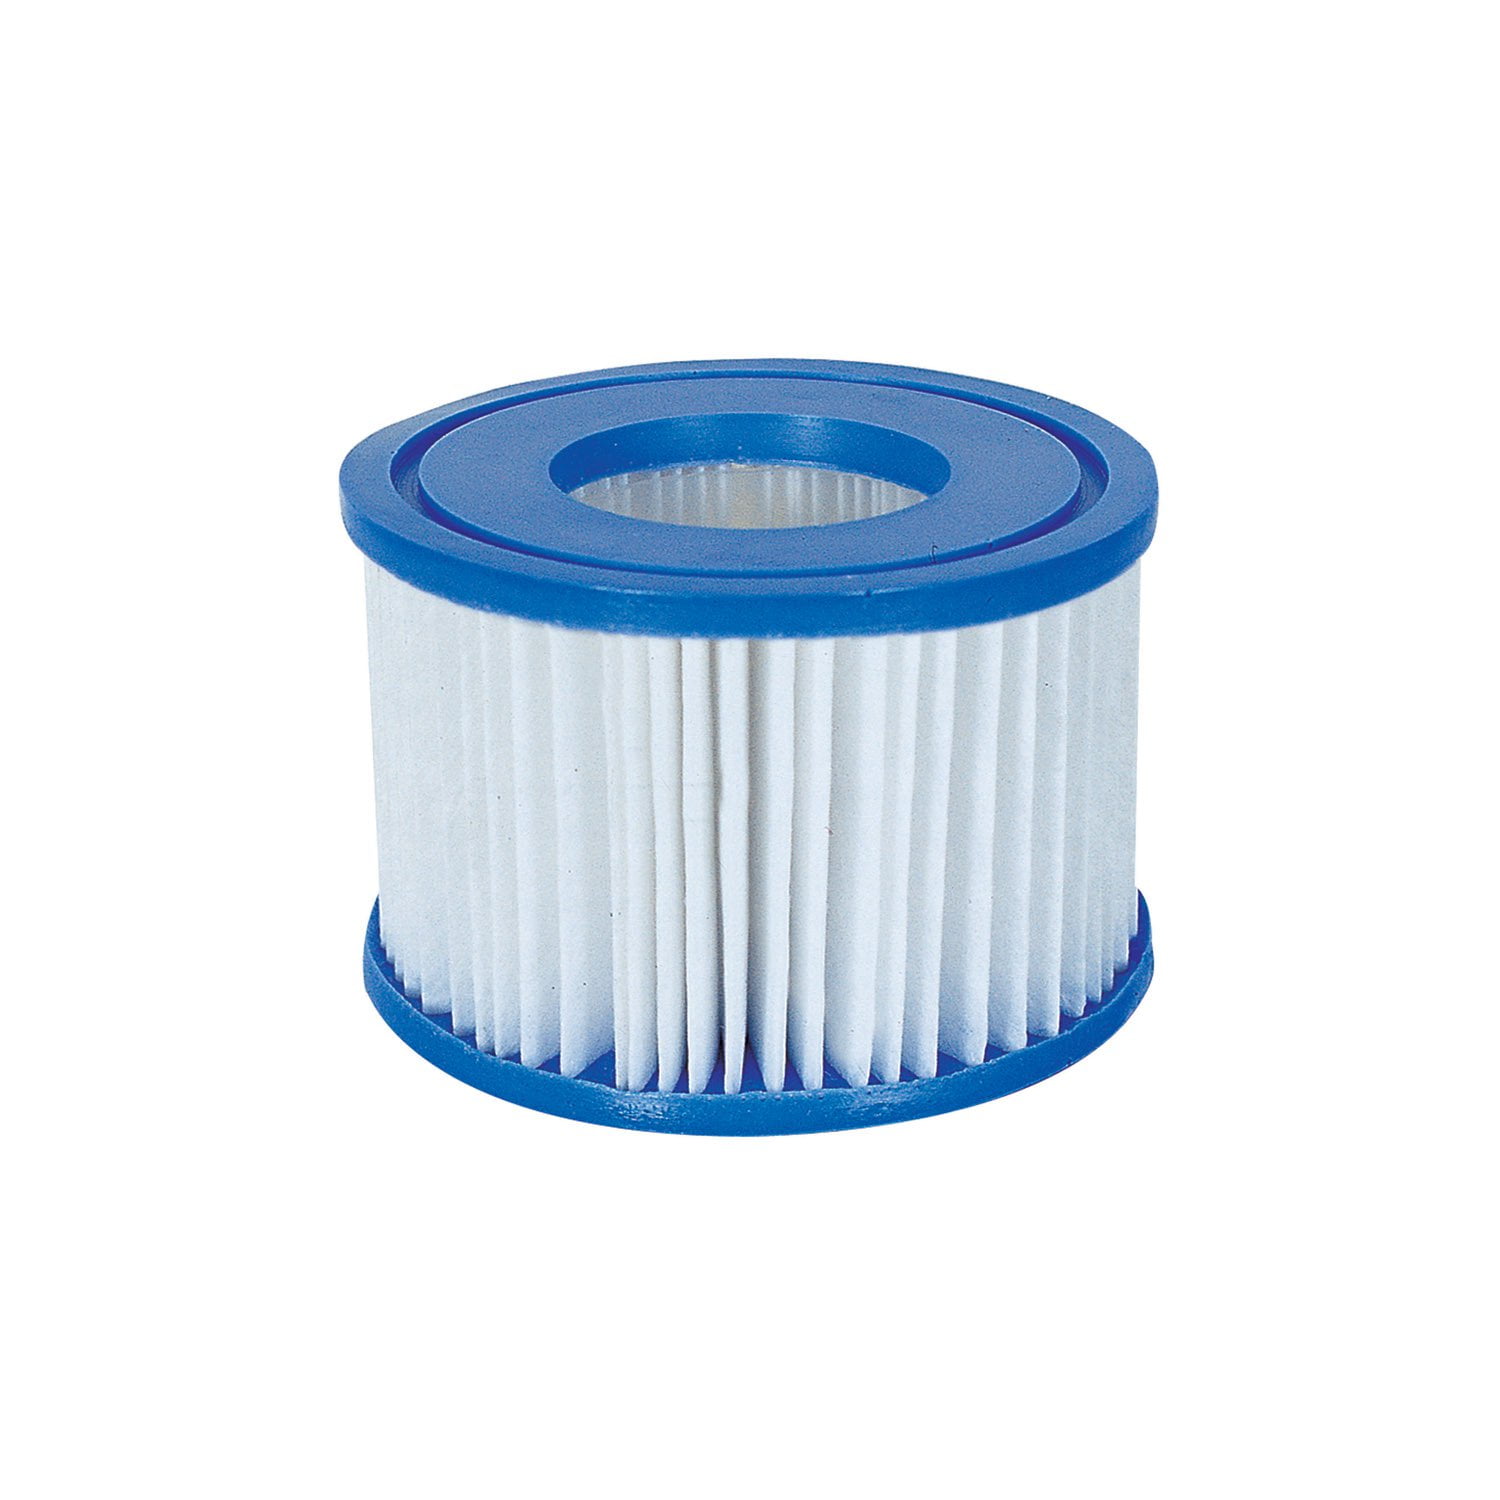 Filters For CLUB SPA Hot Tubs Inflatable Hot Spring Pool Filters Swimming Pools